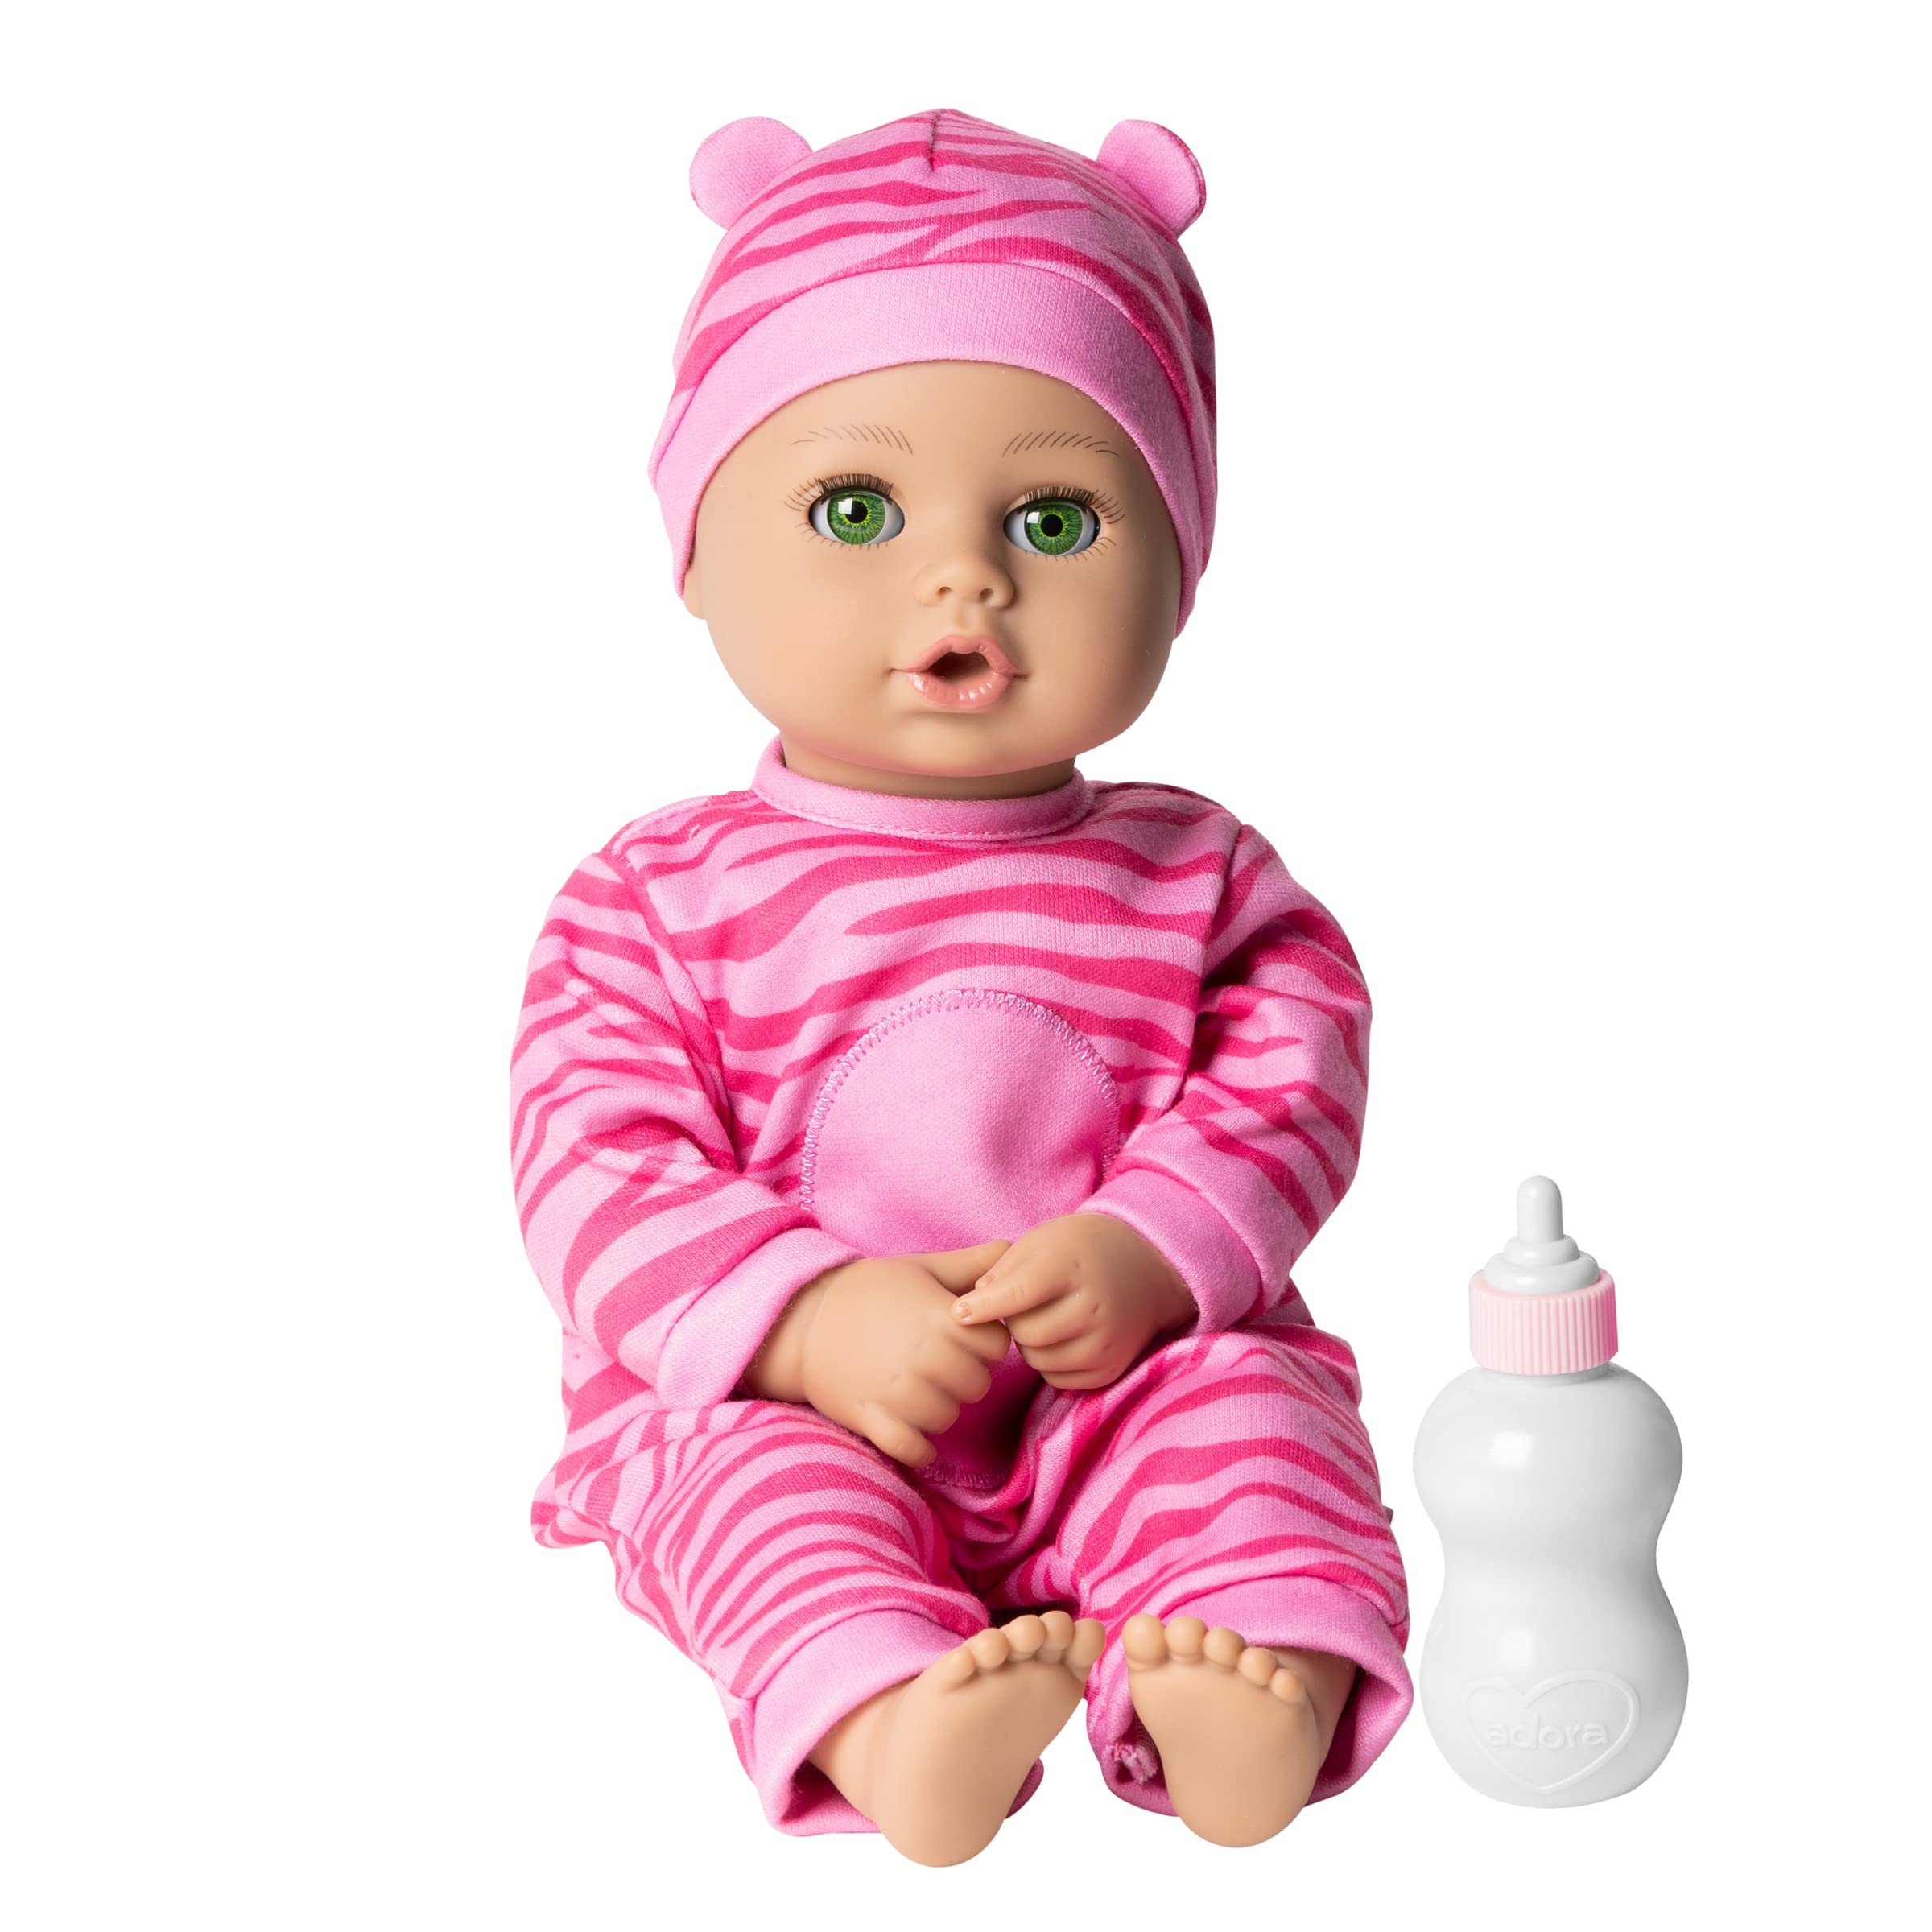 Adora Baby Doll 13 inch Playtime Baby Tiger Bright with a Toy Baby Bottle